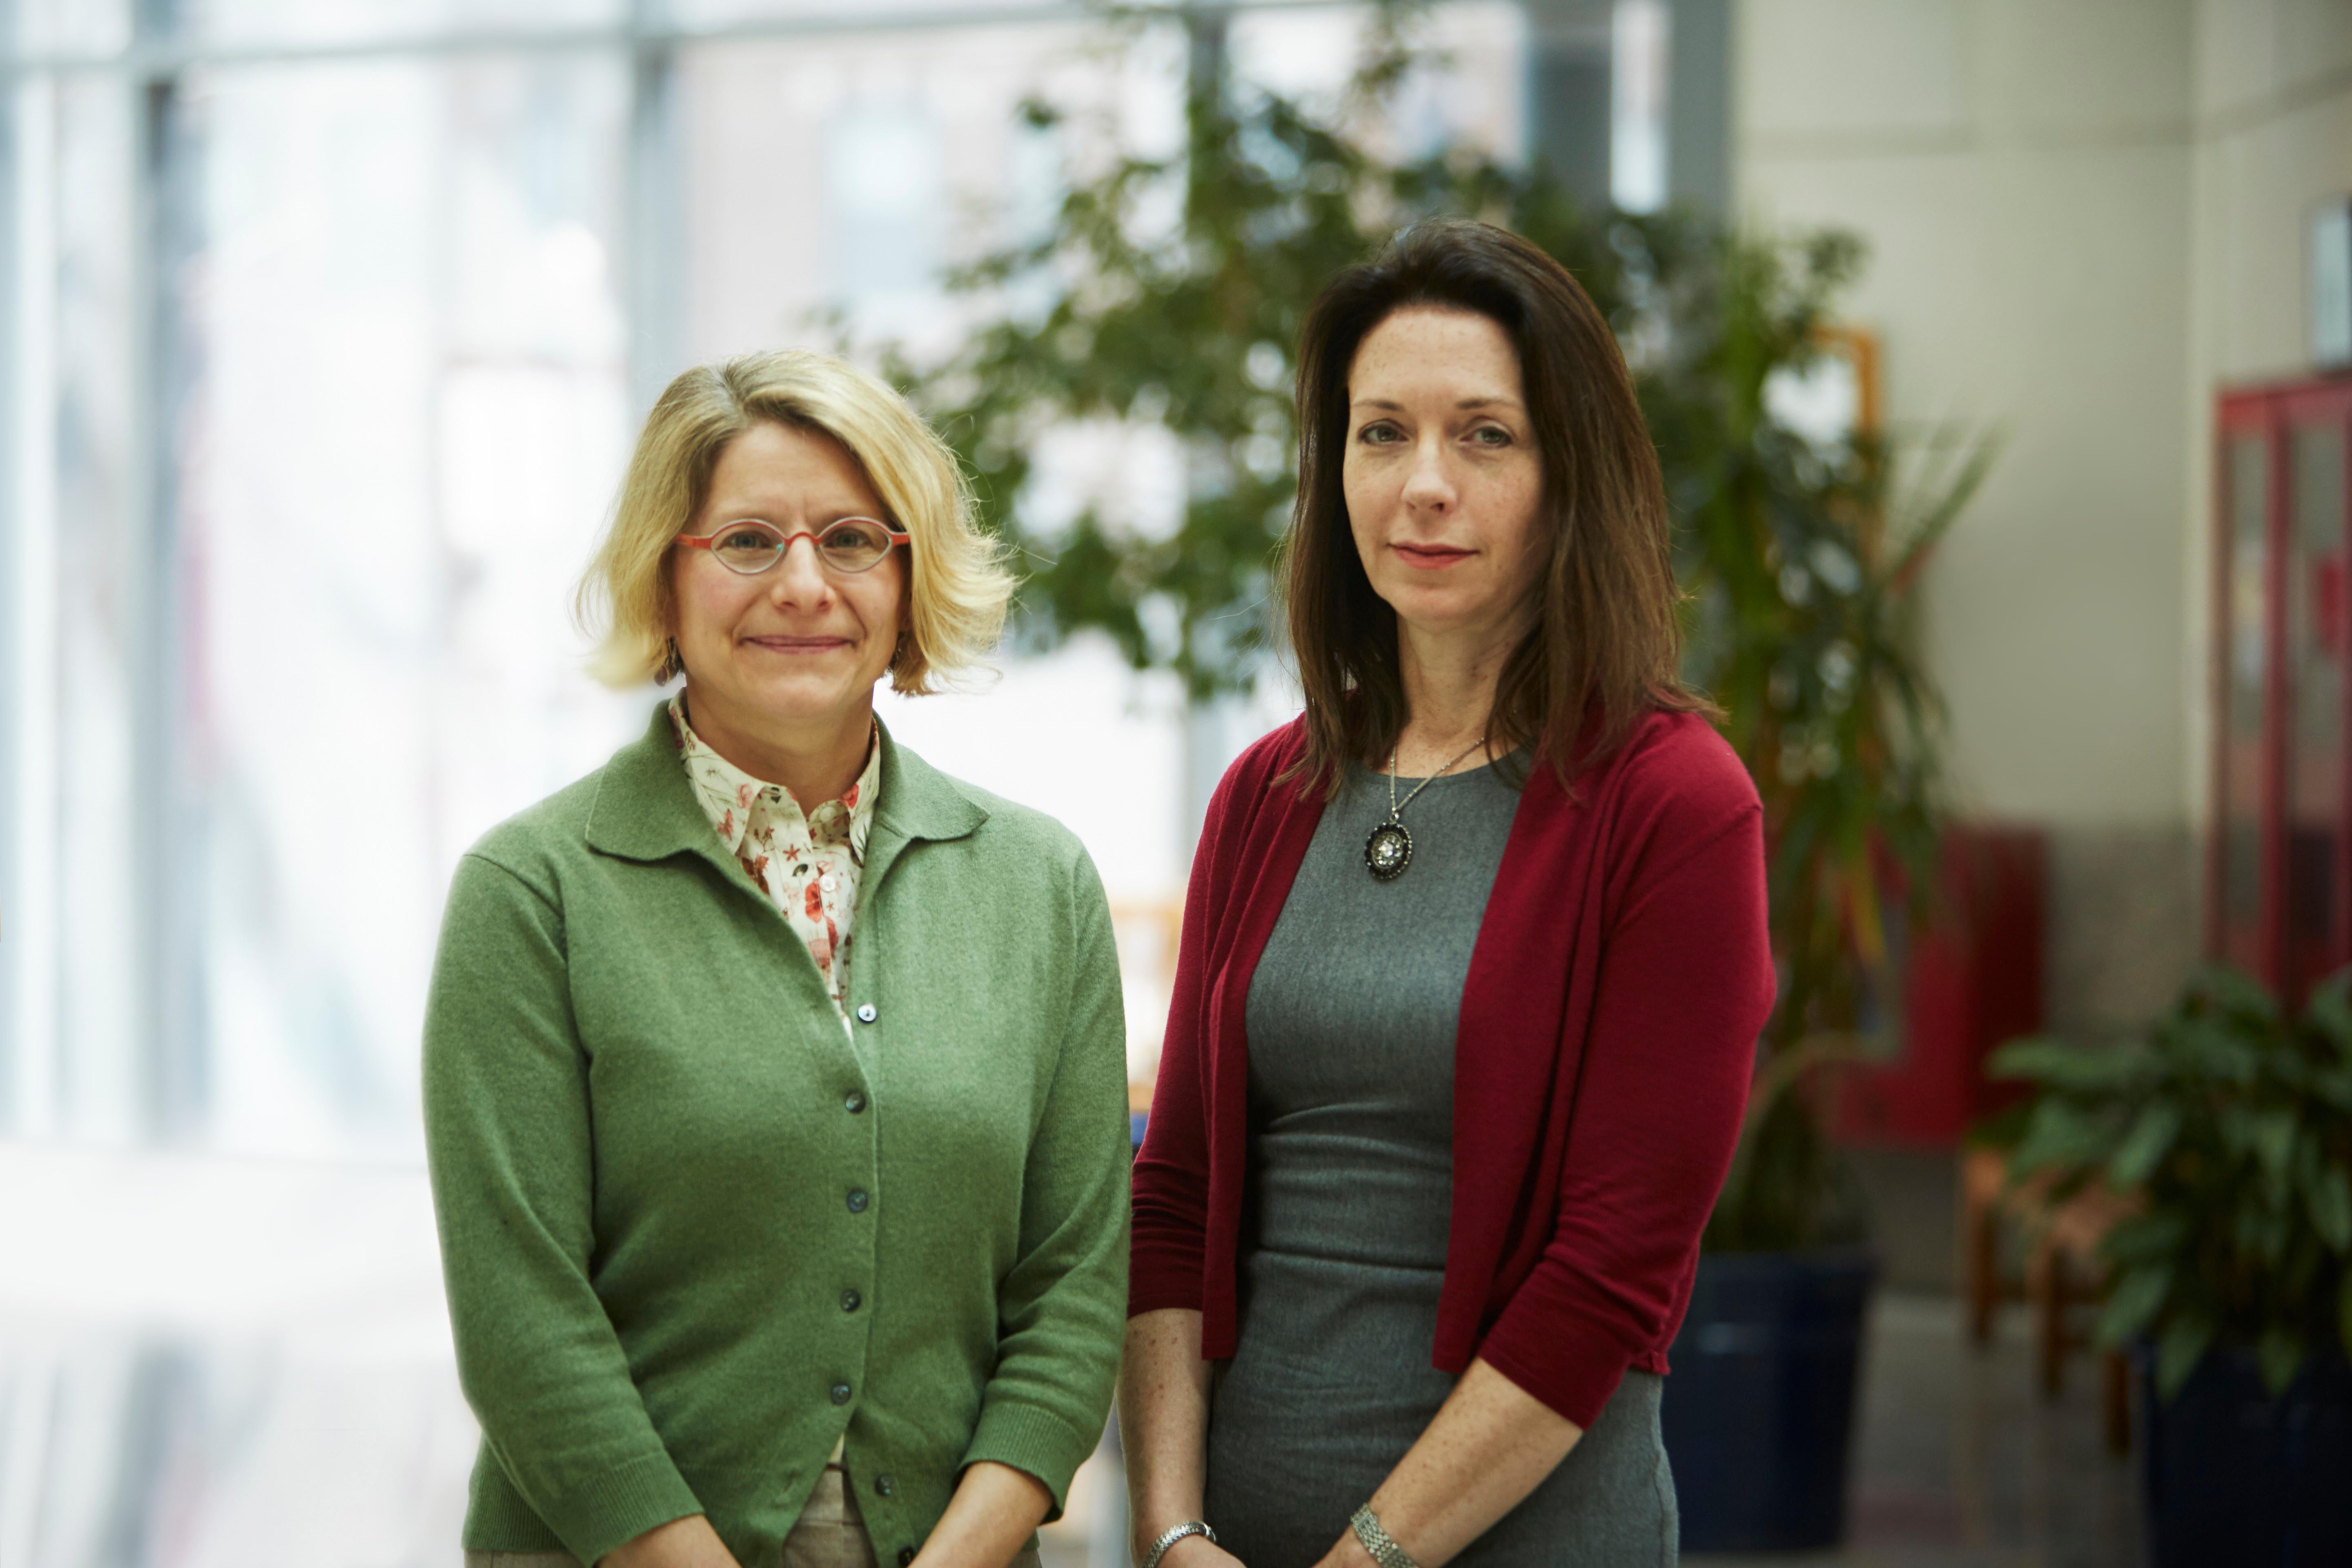 Andrea Roberts, research associate in the Department of Social and Behavioral Sciences (left) and Karestan Chase Koenen, professor of psychiatric epidemiology in the Department of Epidemiology.